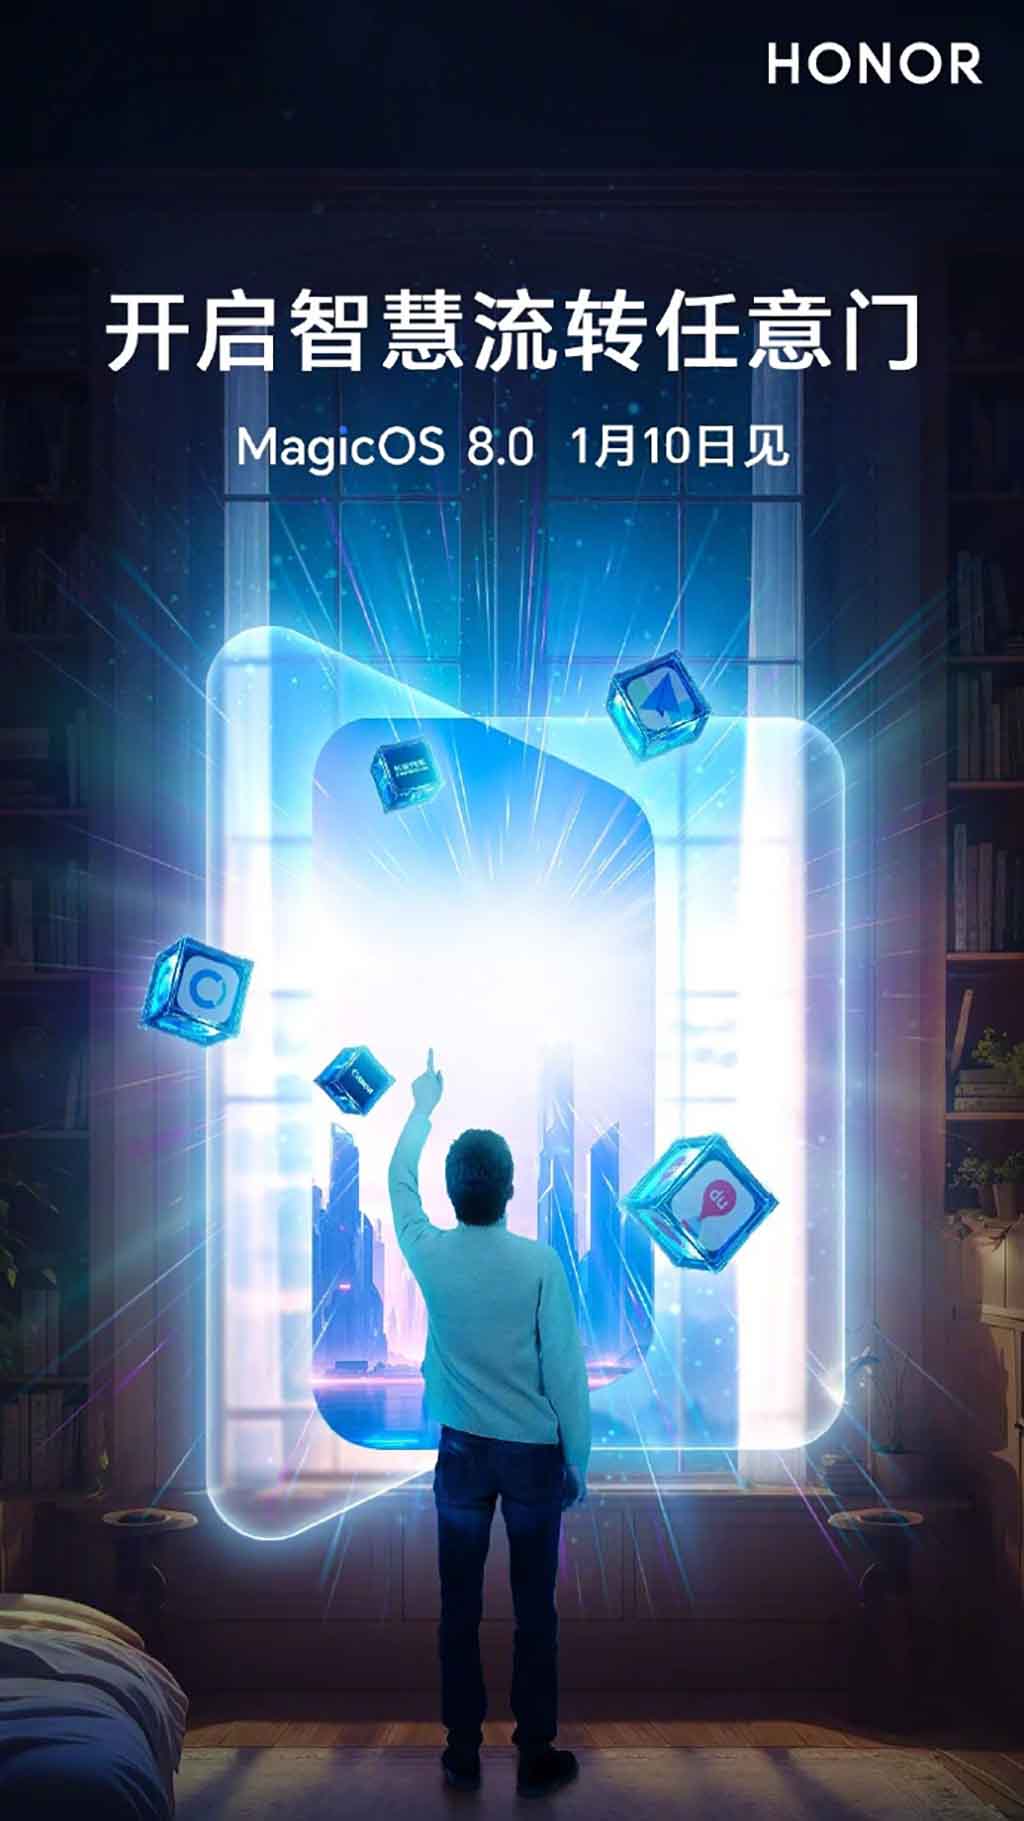 Honor MagicOS 8 Anywhere Door feature